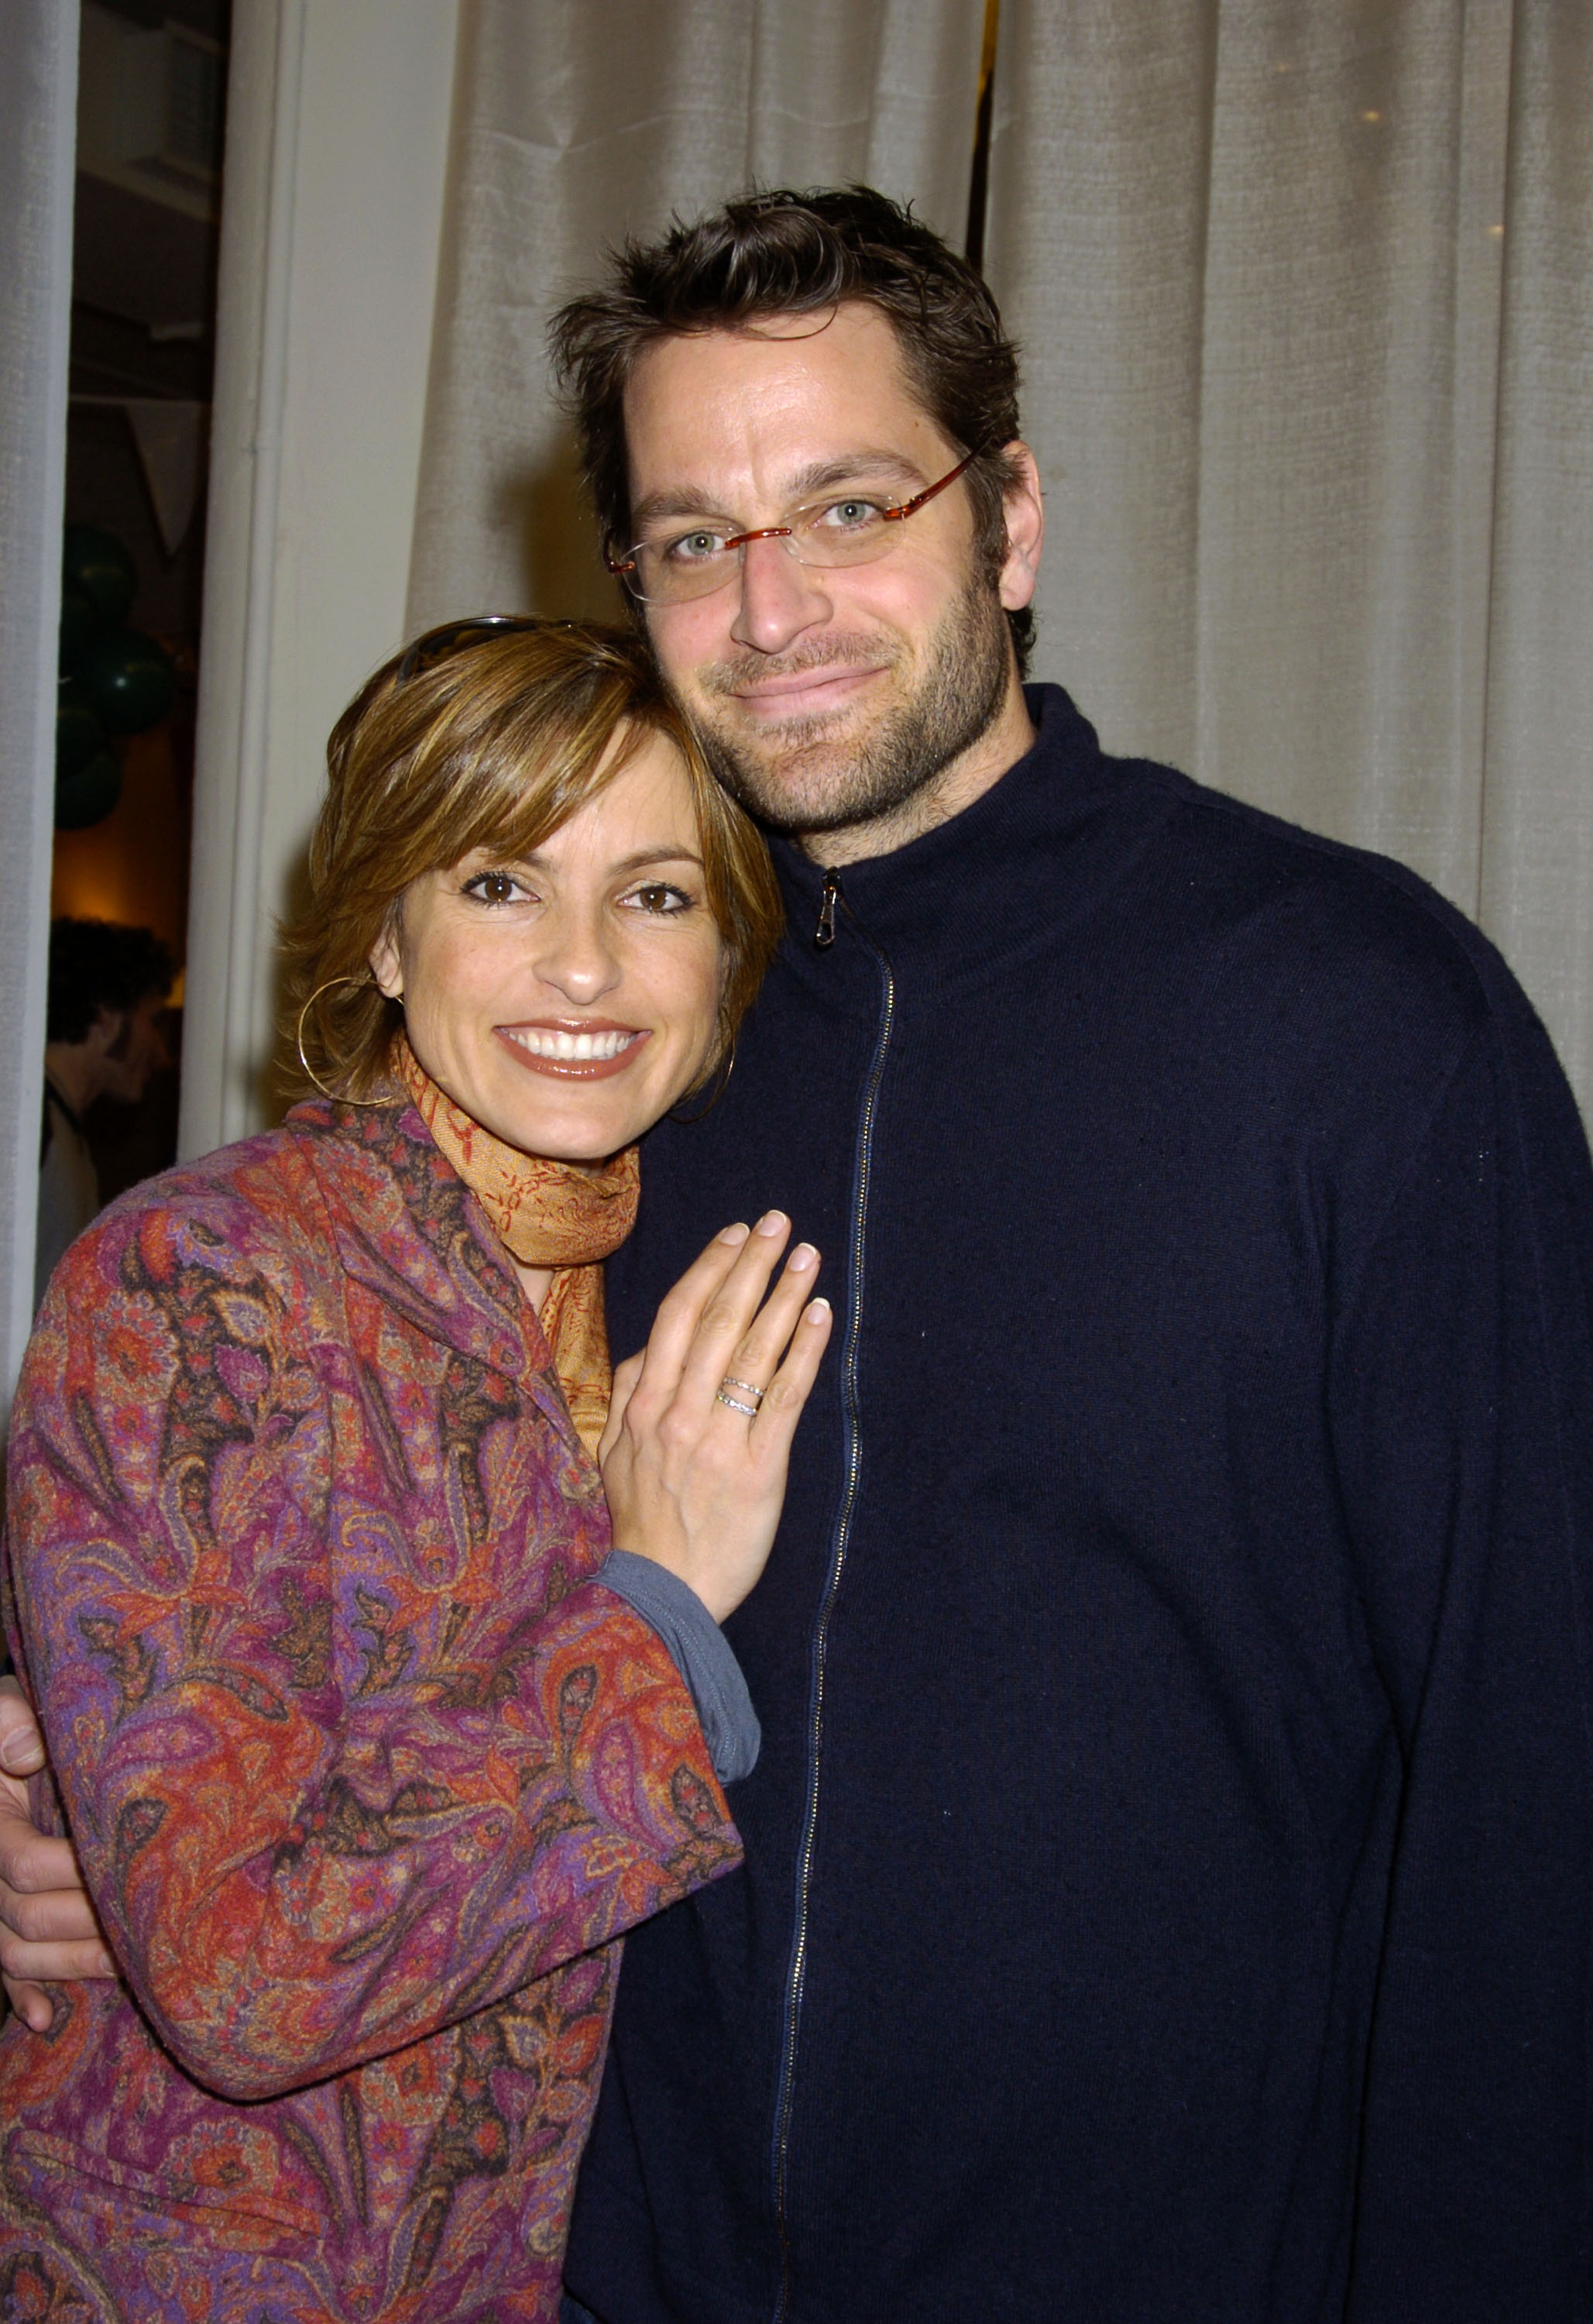 Mariska Hargitay and Peter Hermann during the 3rd Annual "Children's Day Artrageous" at The Metropolitan Pavilion on April 25, 2005 in New York City. | Source: Getty Images